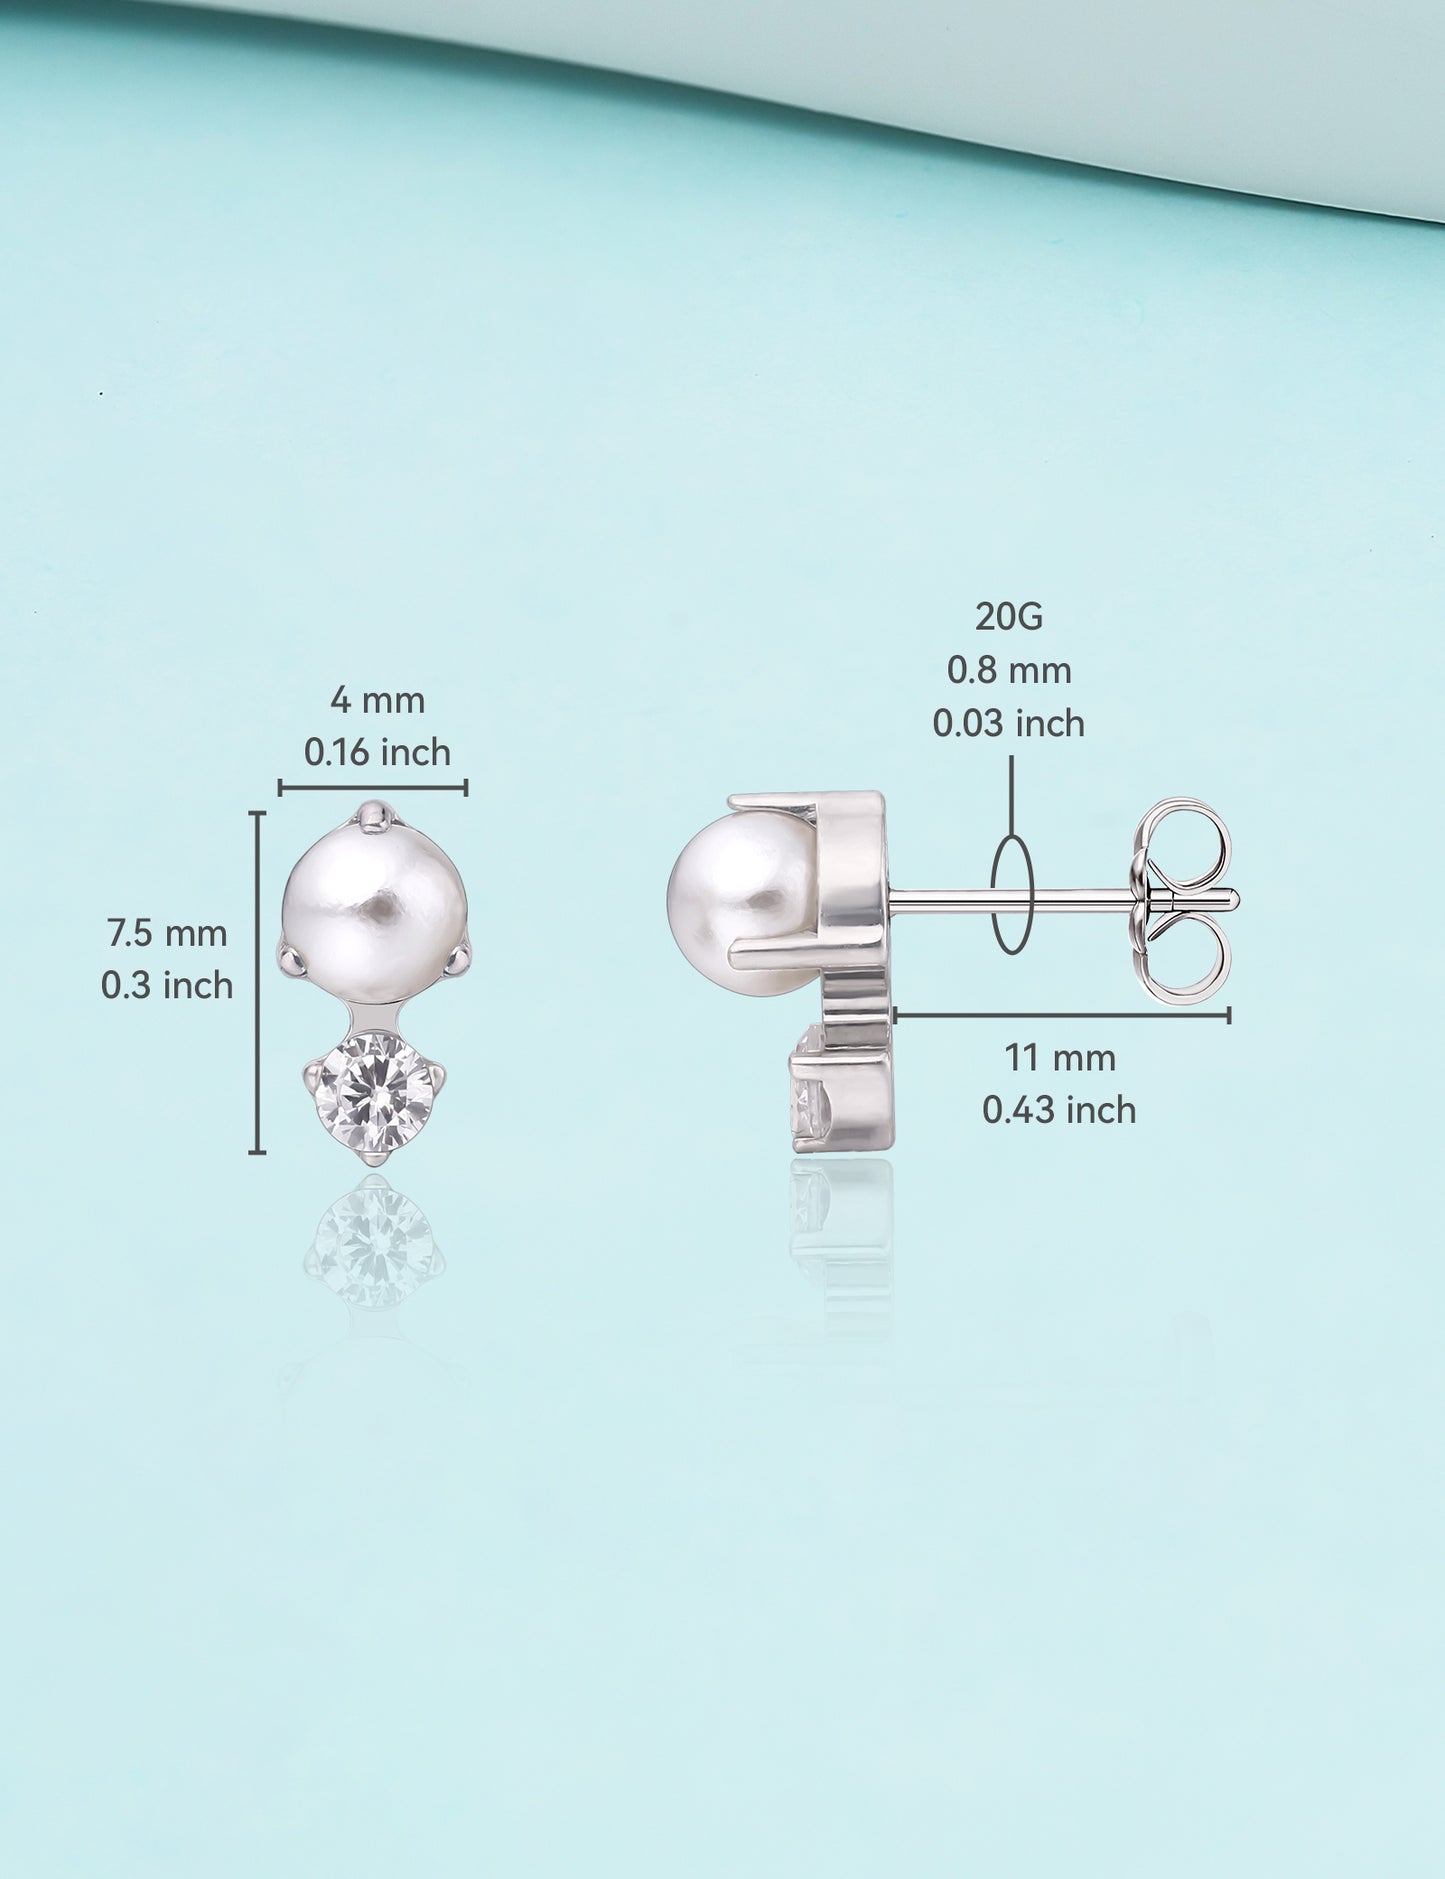 Limerencia G23 Pure Titanium Hypoallergenic Earrings | CZ + Pearl F136 Implant Grade Titanium Jewelry for Sensitive Ears